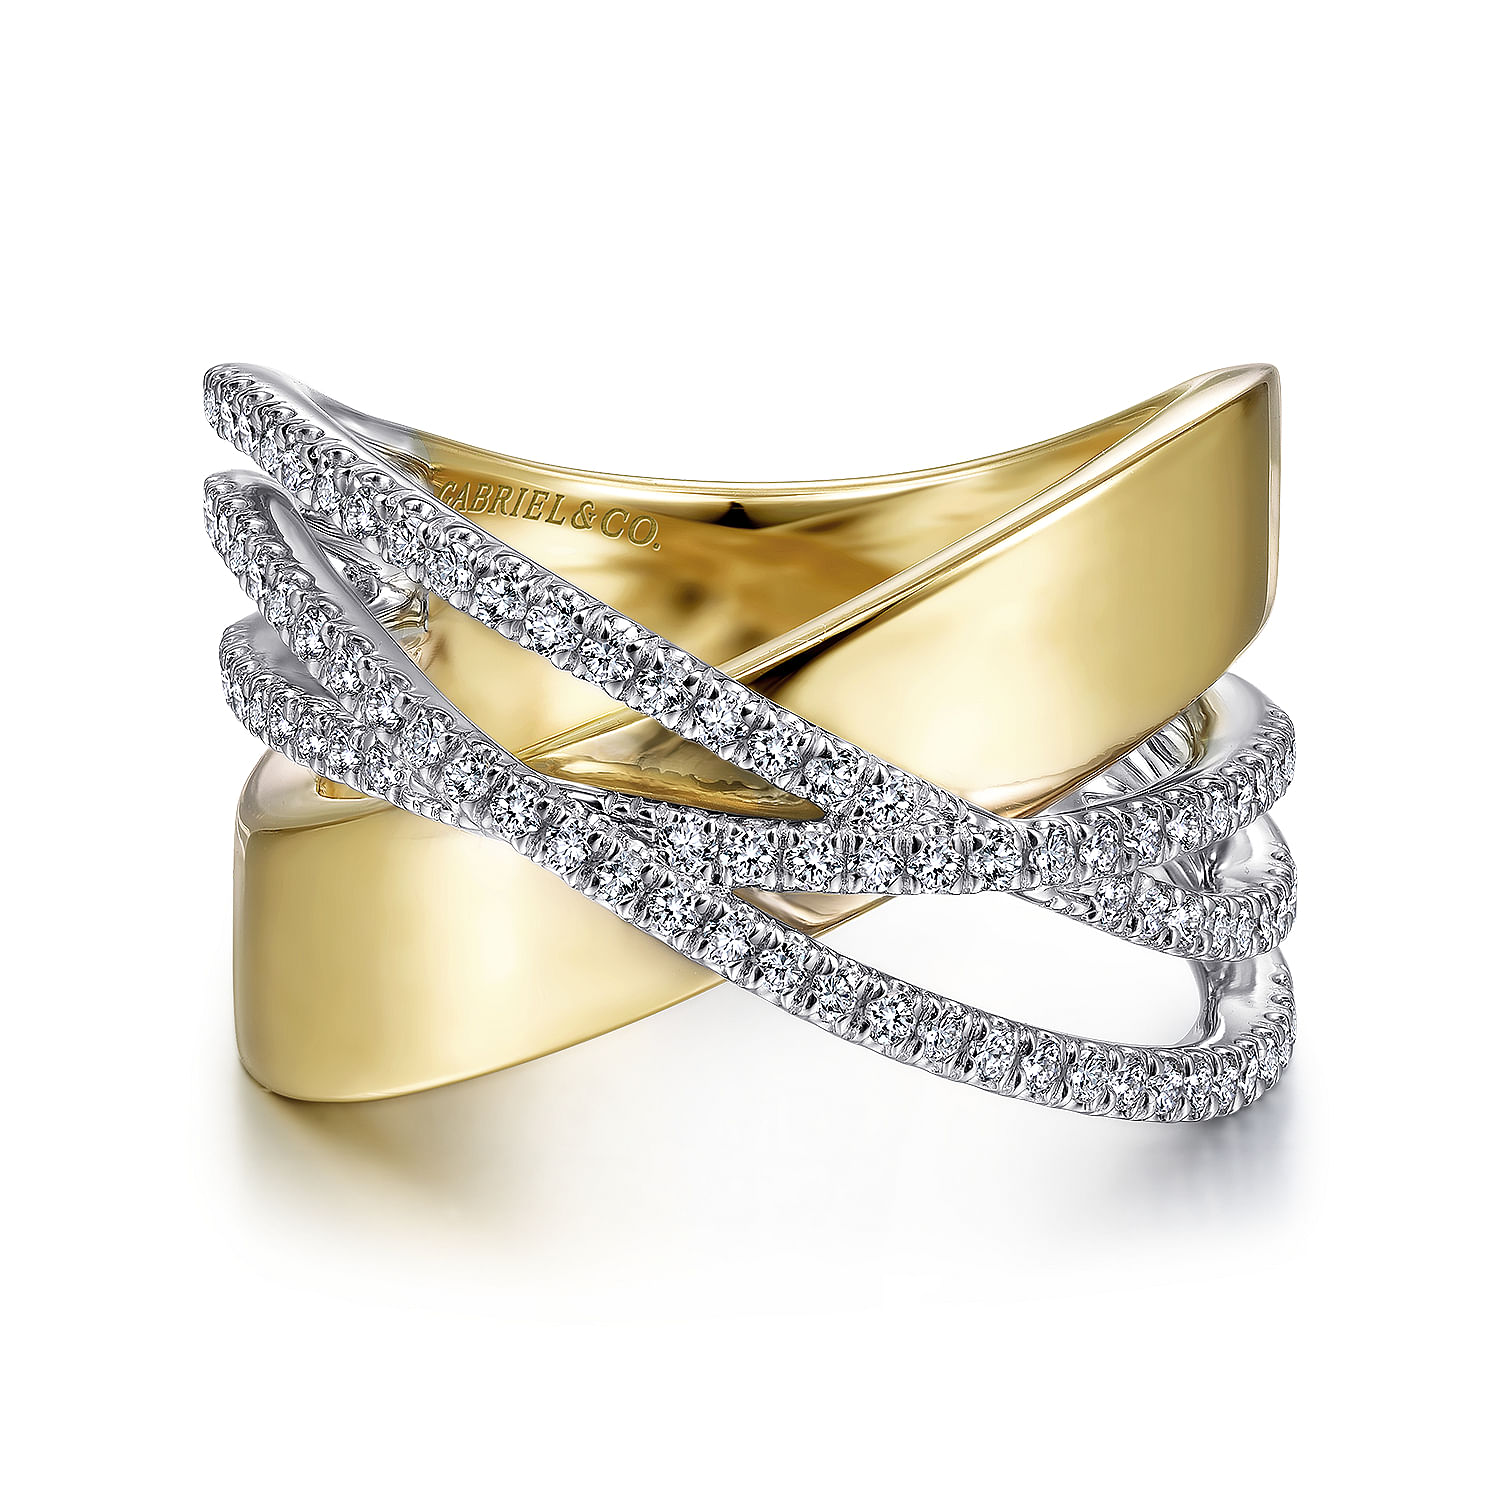 Gabriel - 14K White-Yellow Gold Polished and Diamond Bands Criss Cross Ring